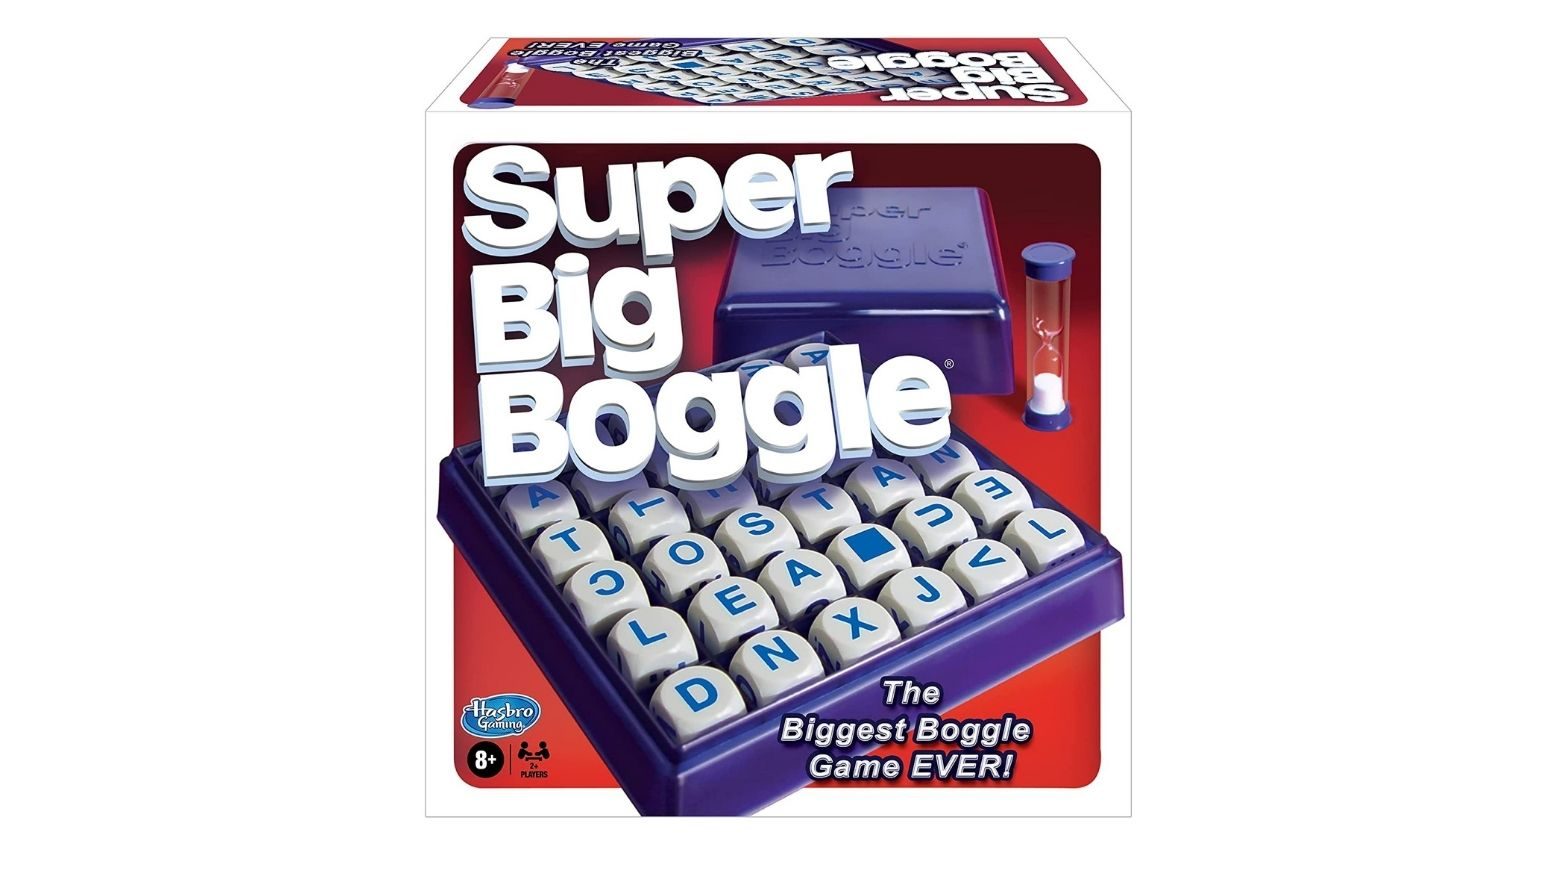 Boggle is a classic word game everyone knows and loves